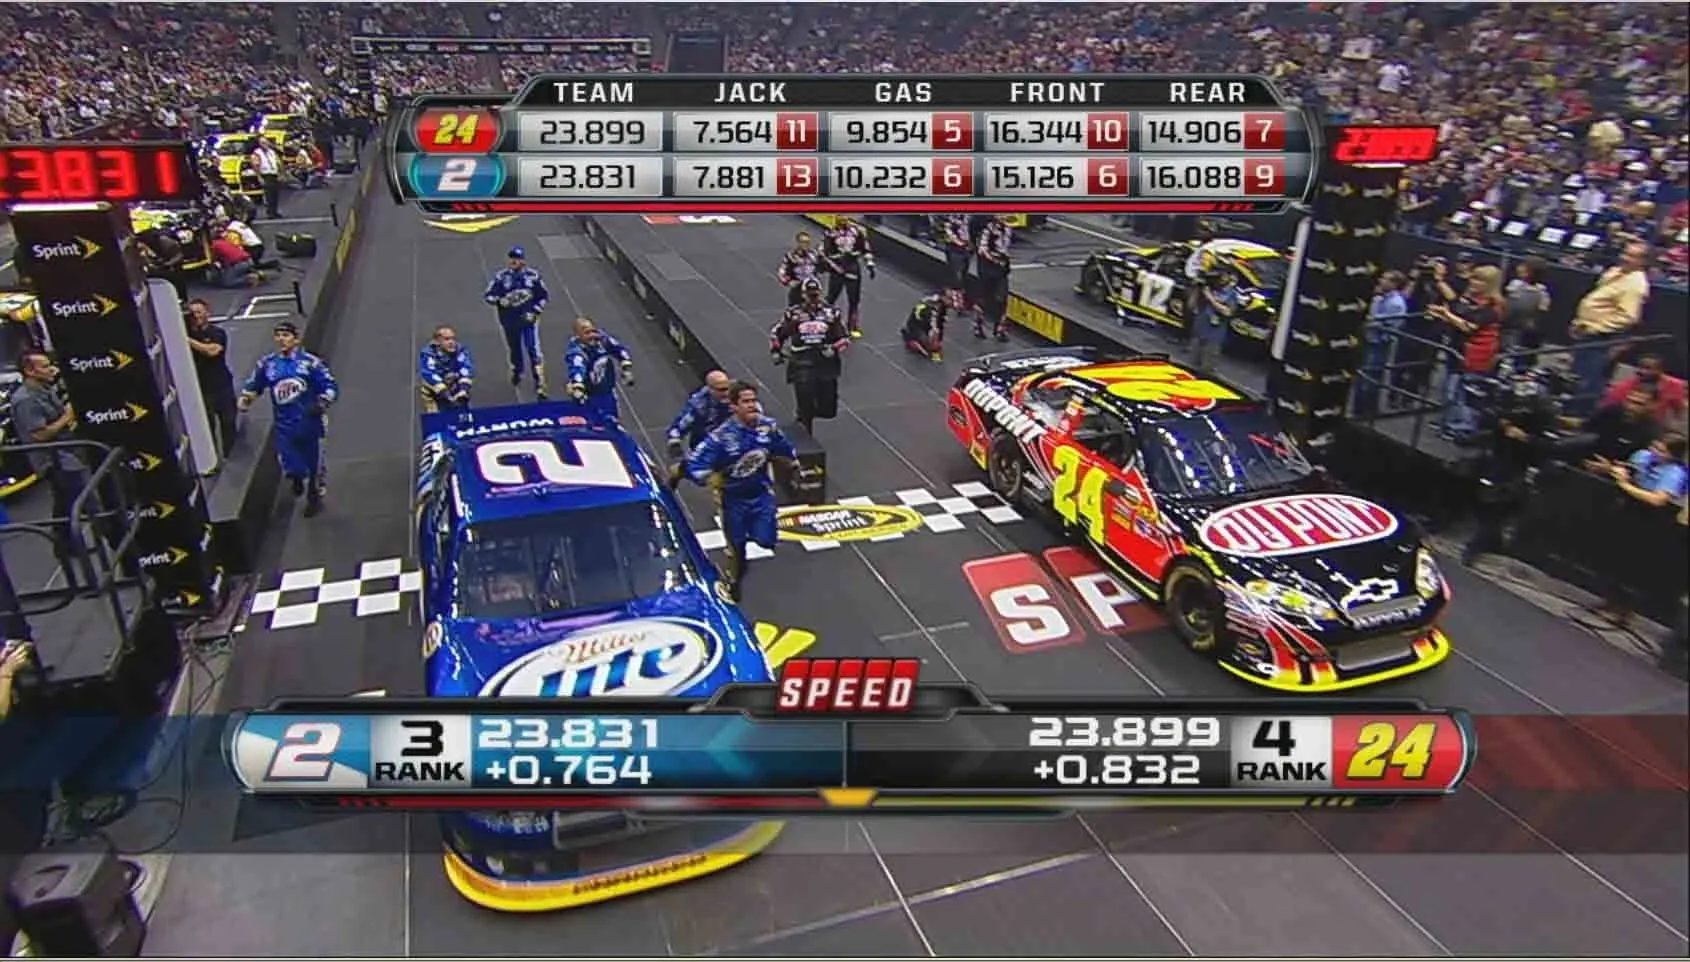 A tv screen showing the race track and pit crew.